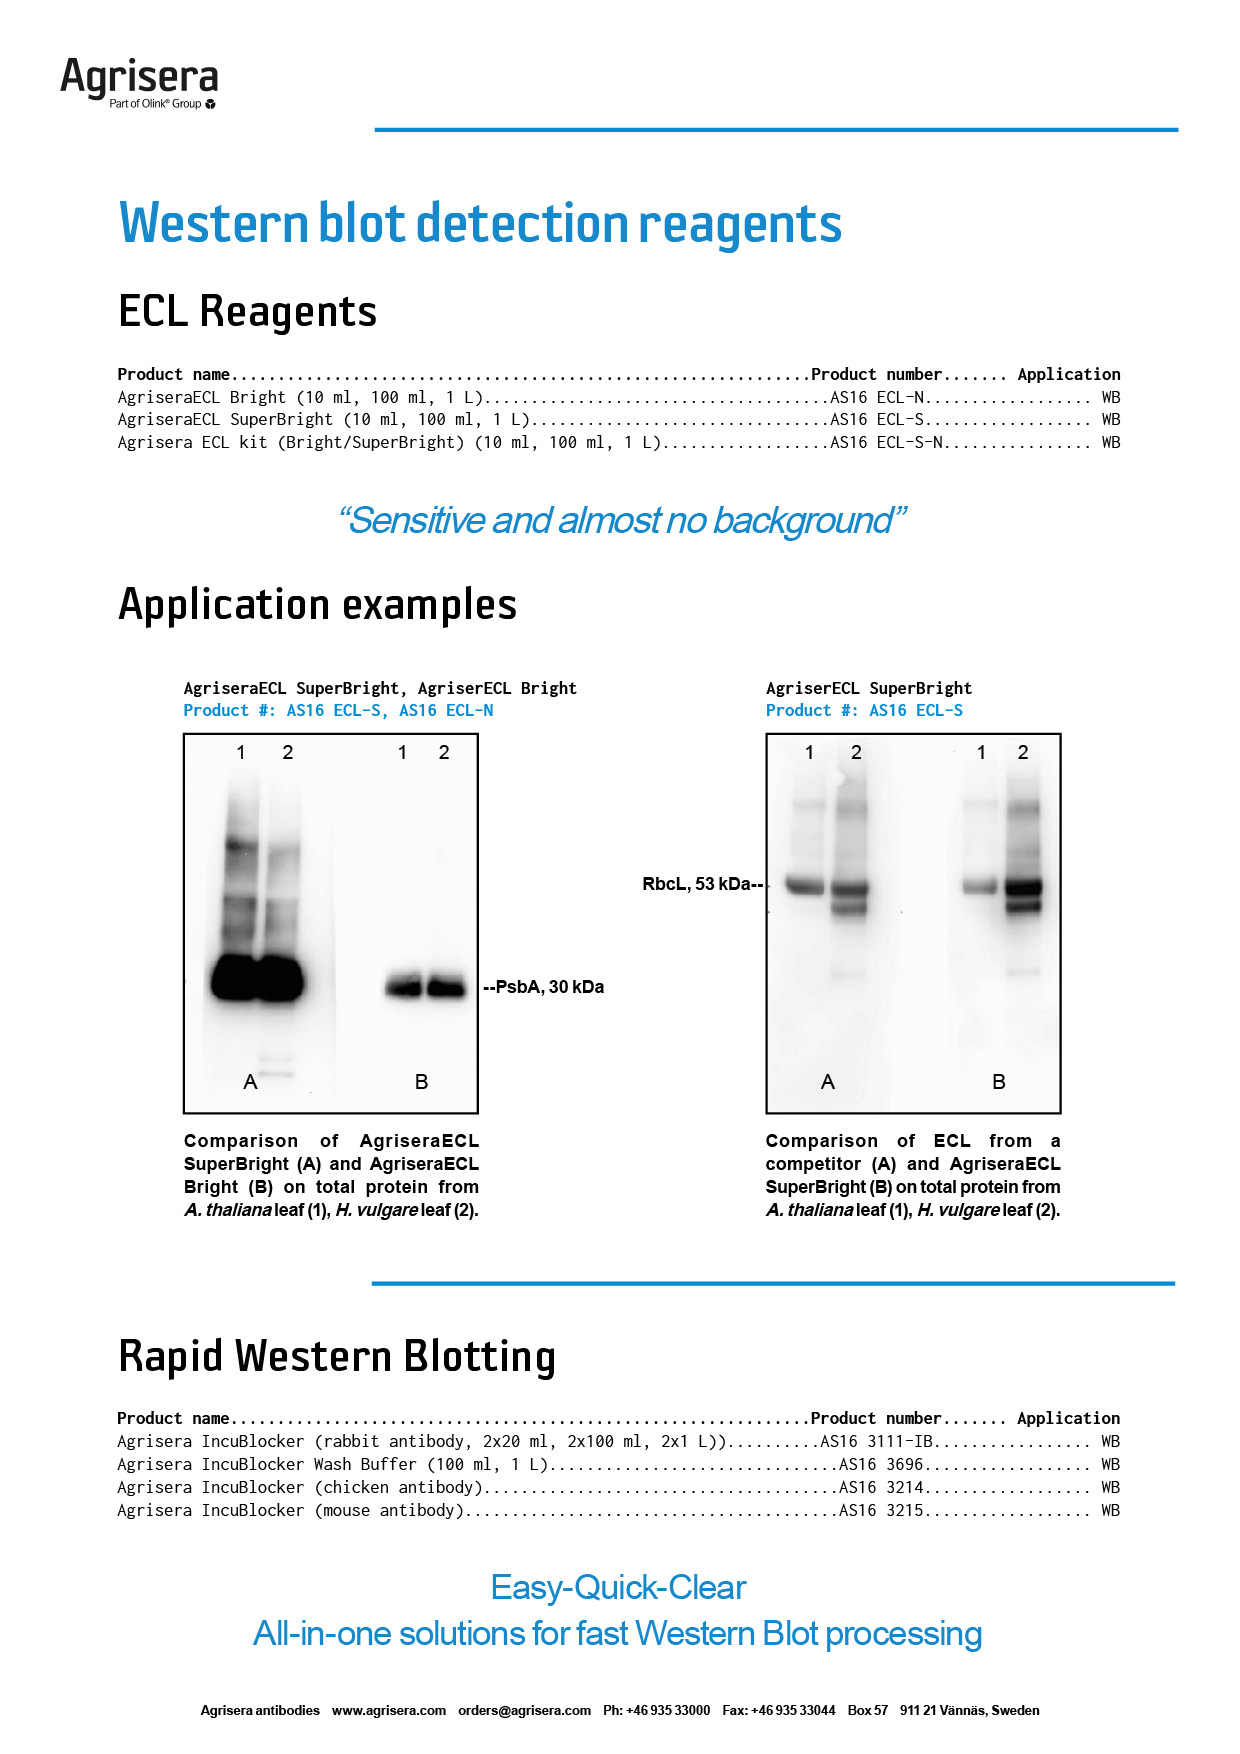 Agrisera ECL detection reagents